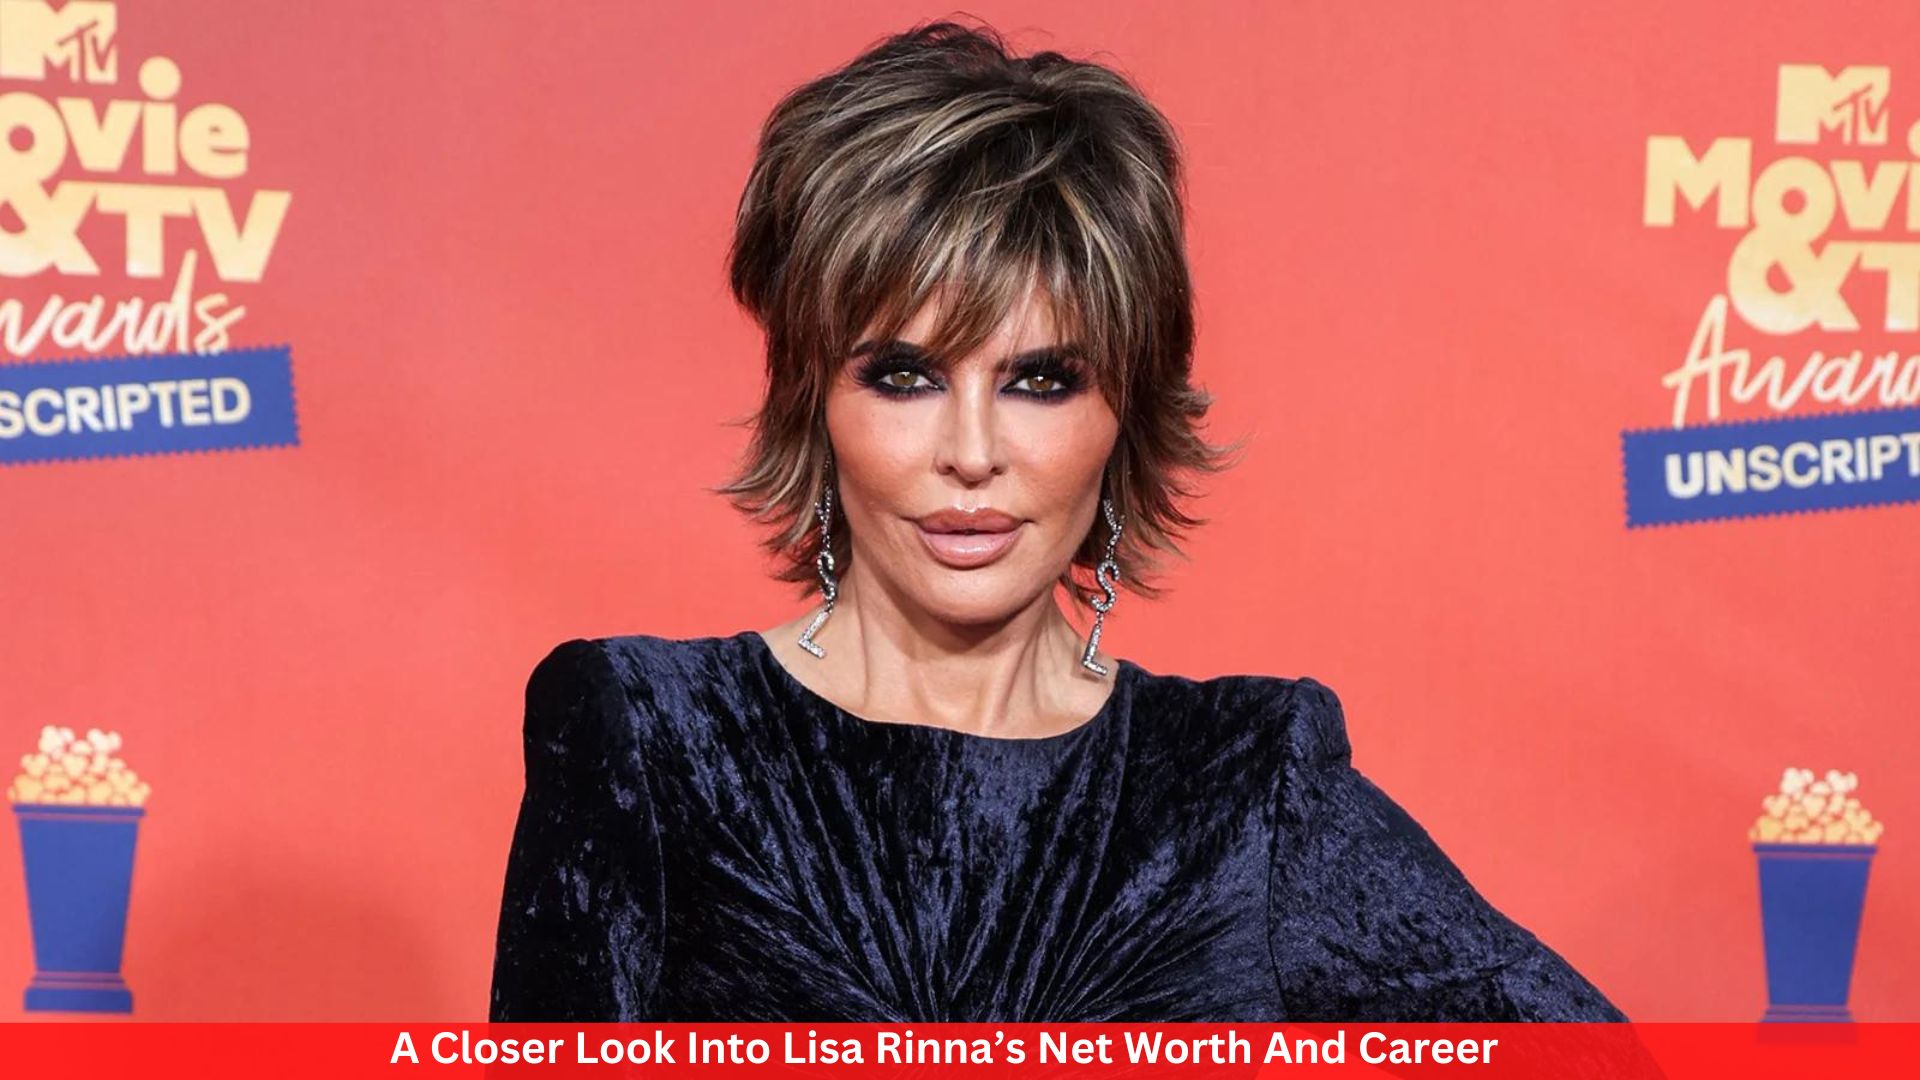 A Closer Look Into Lisa Rinna’s Net Worth And Career